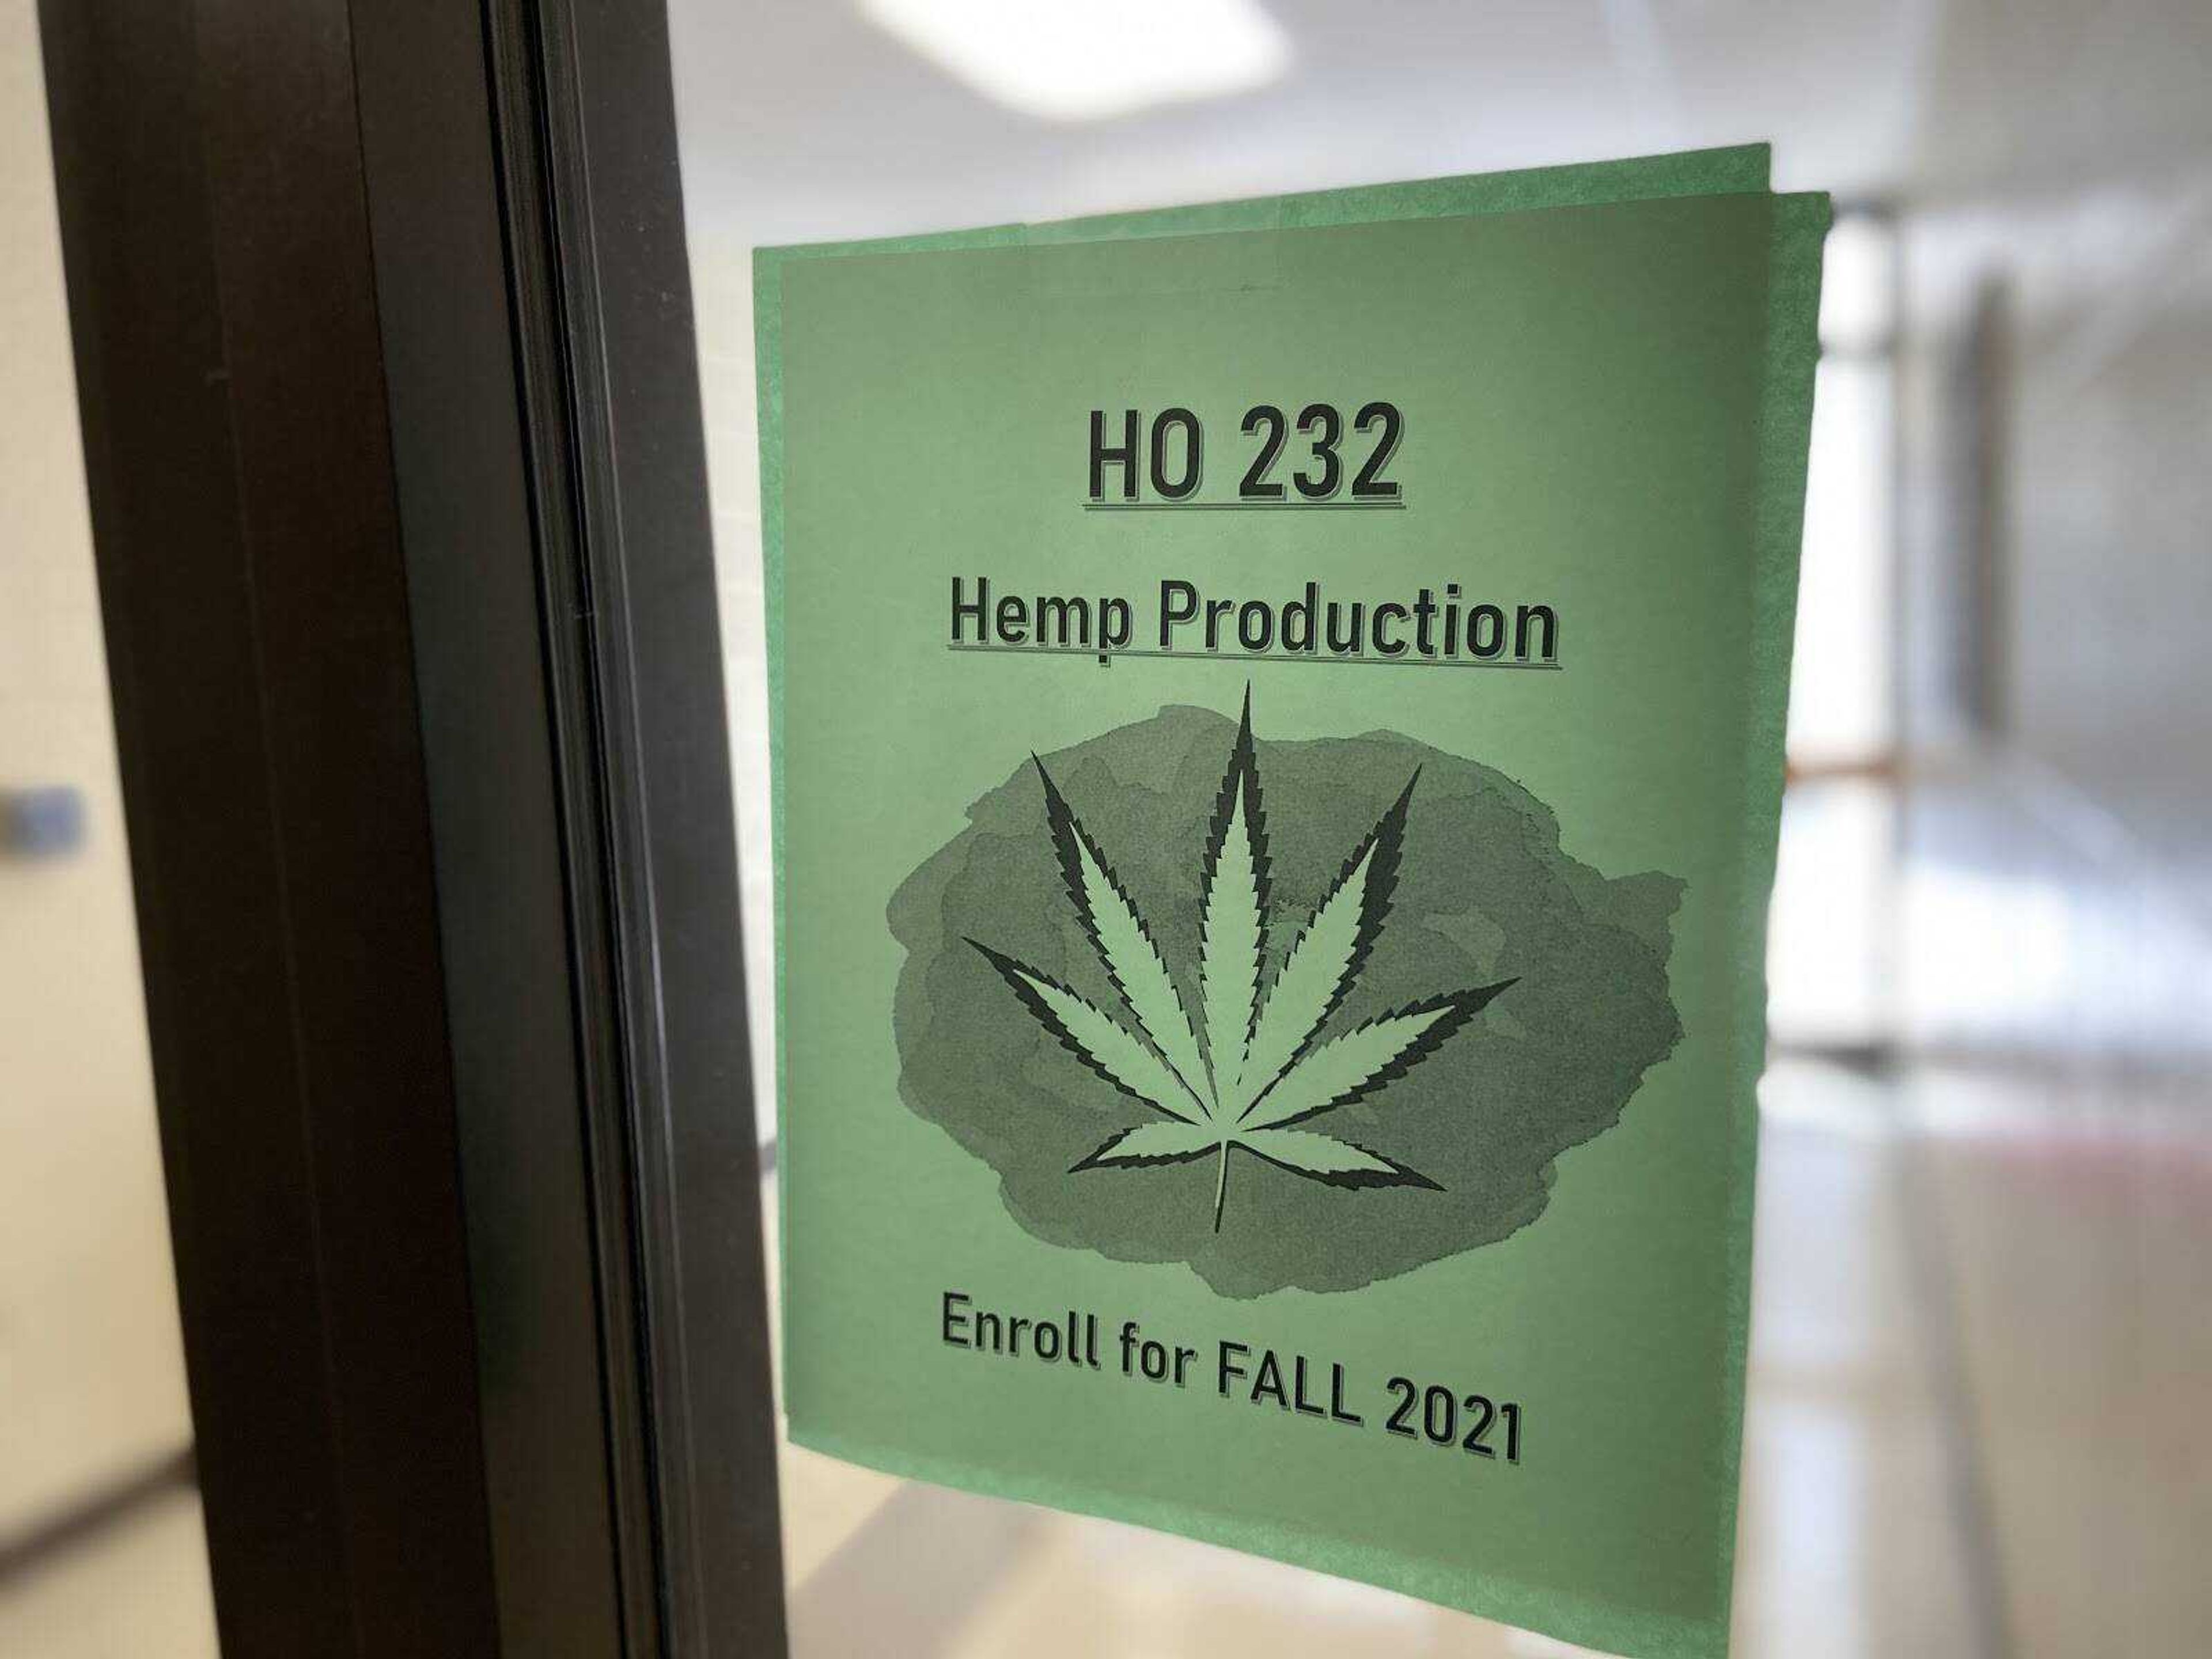 Preparing students for a booming industry through producing hemp